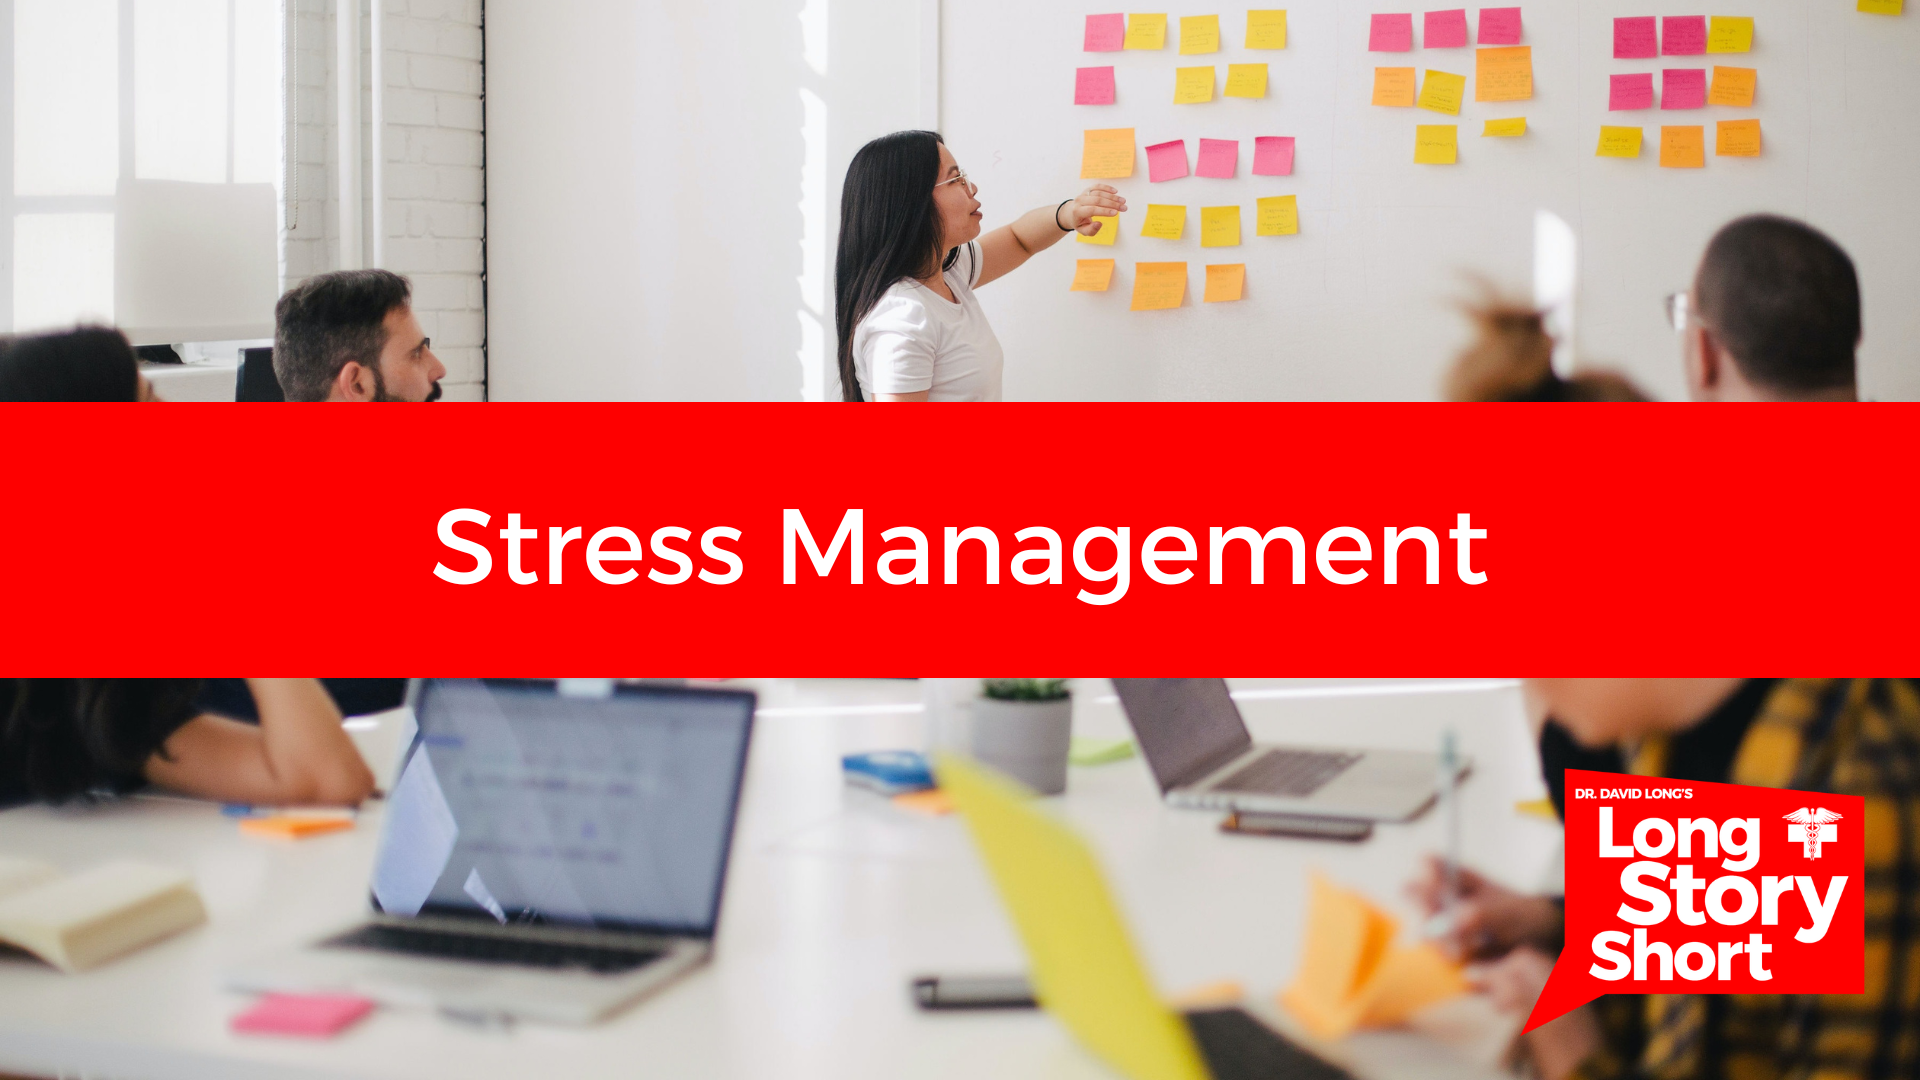 You are currently viewing Stress Management – Dr. David Long